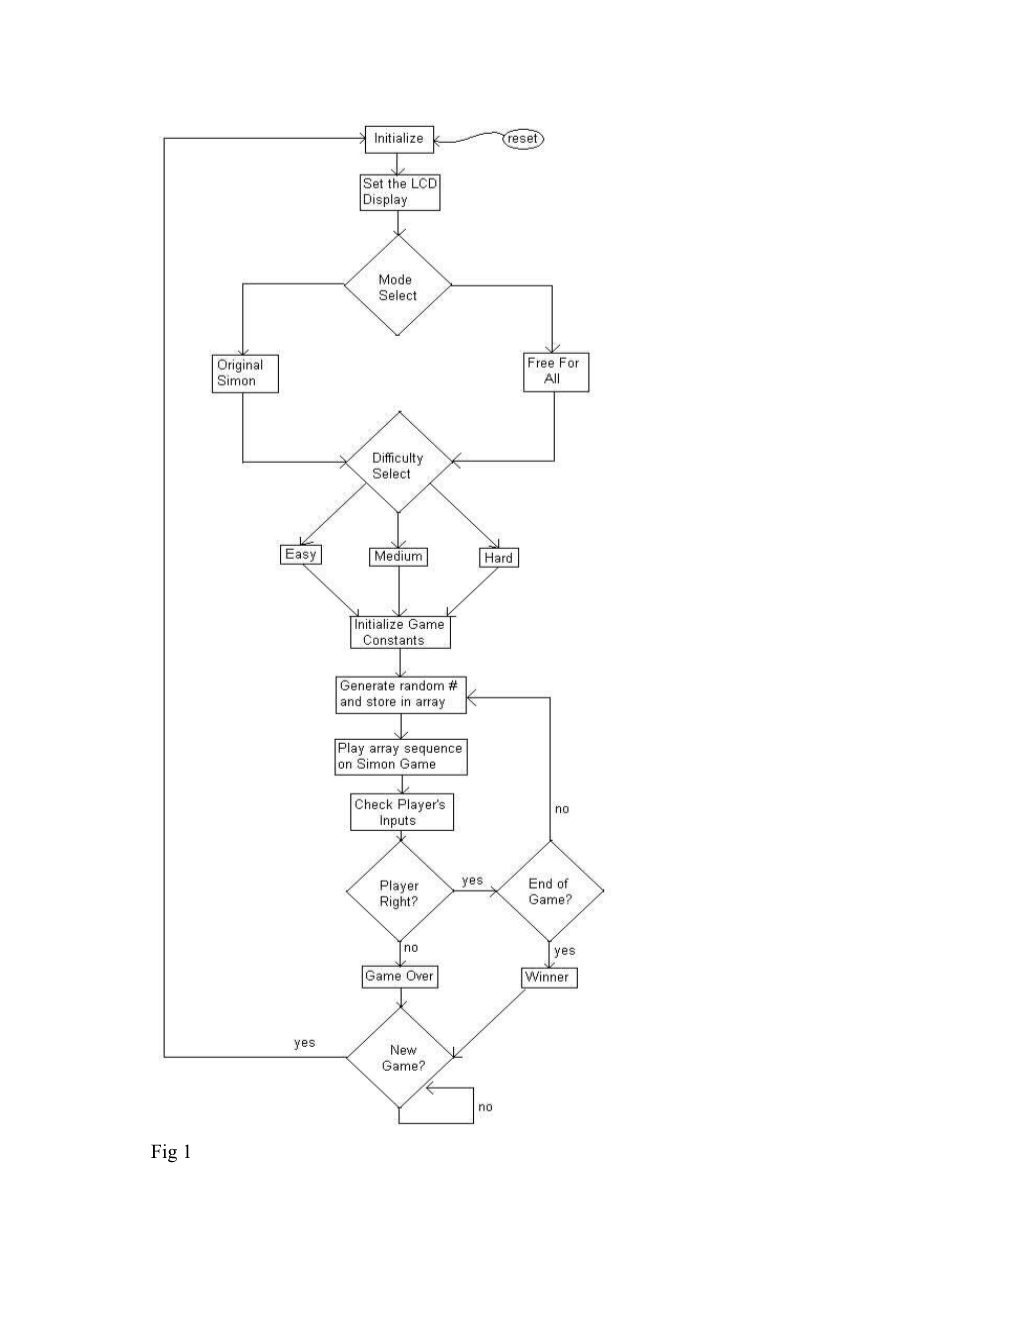 The Game Was Designed by Following the Procedure Outlined in the Flowchart in Fig 1. The